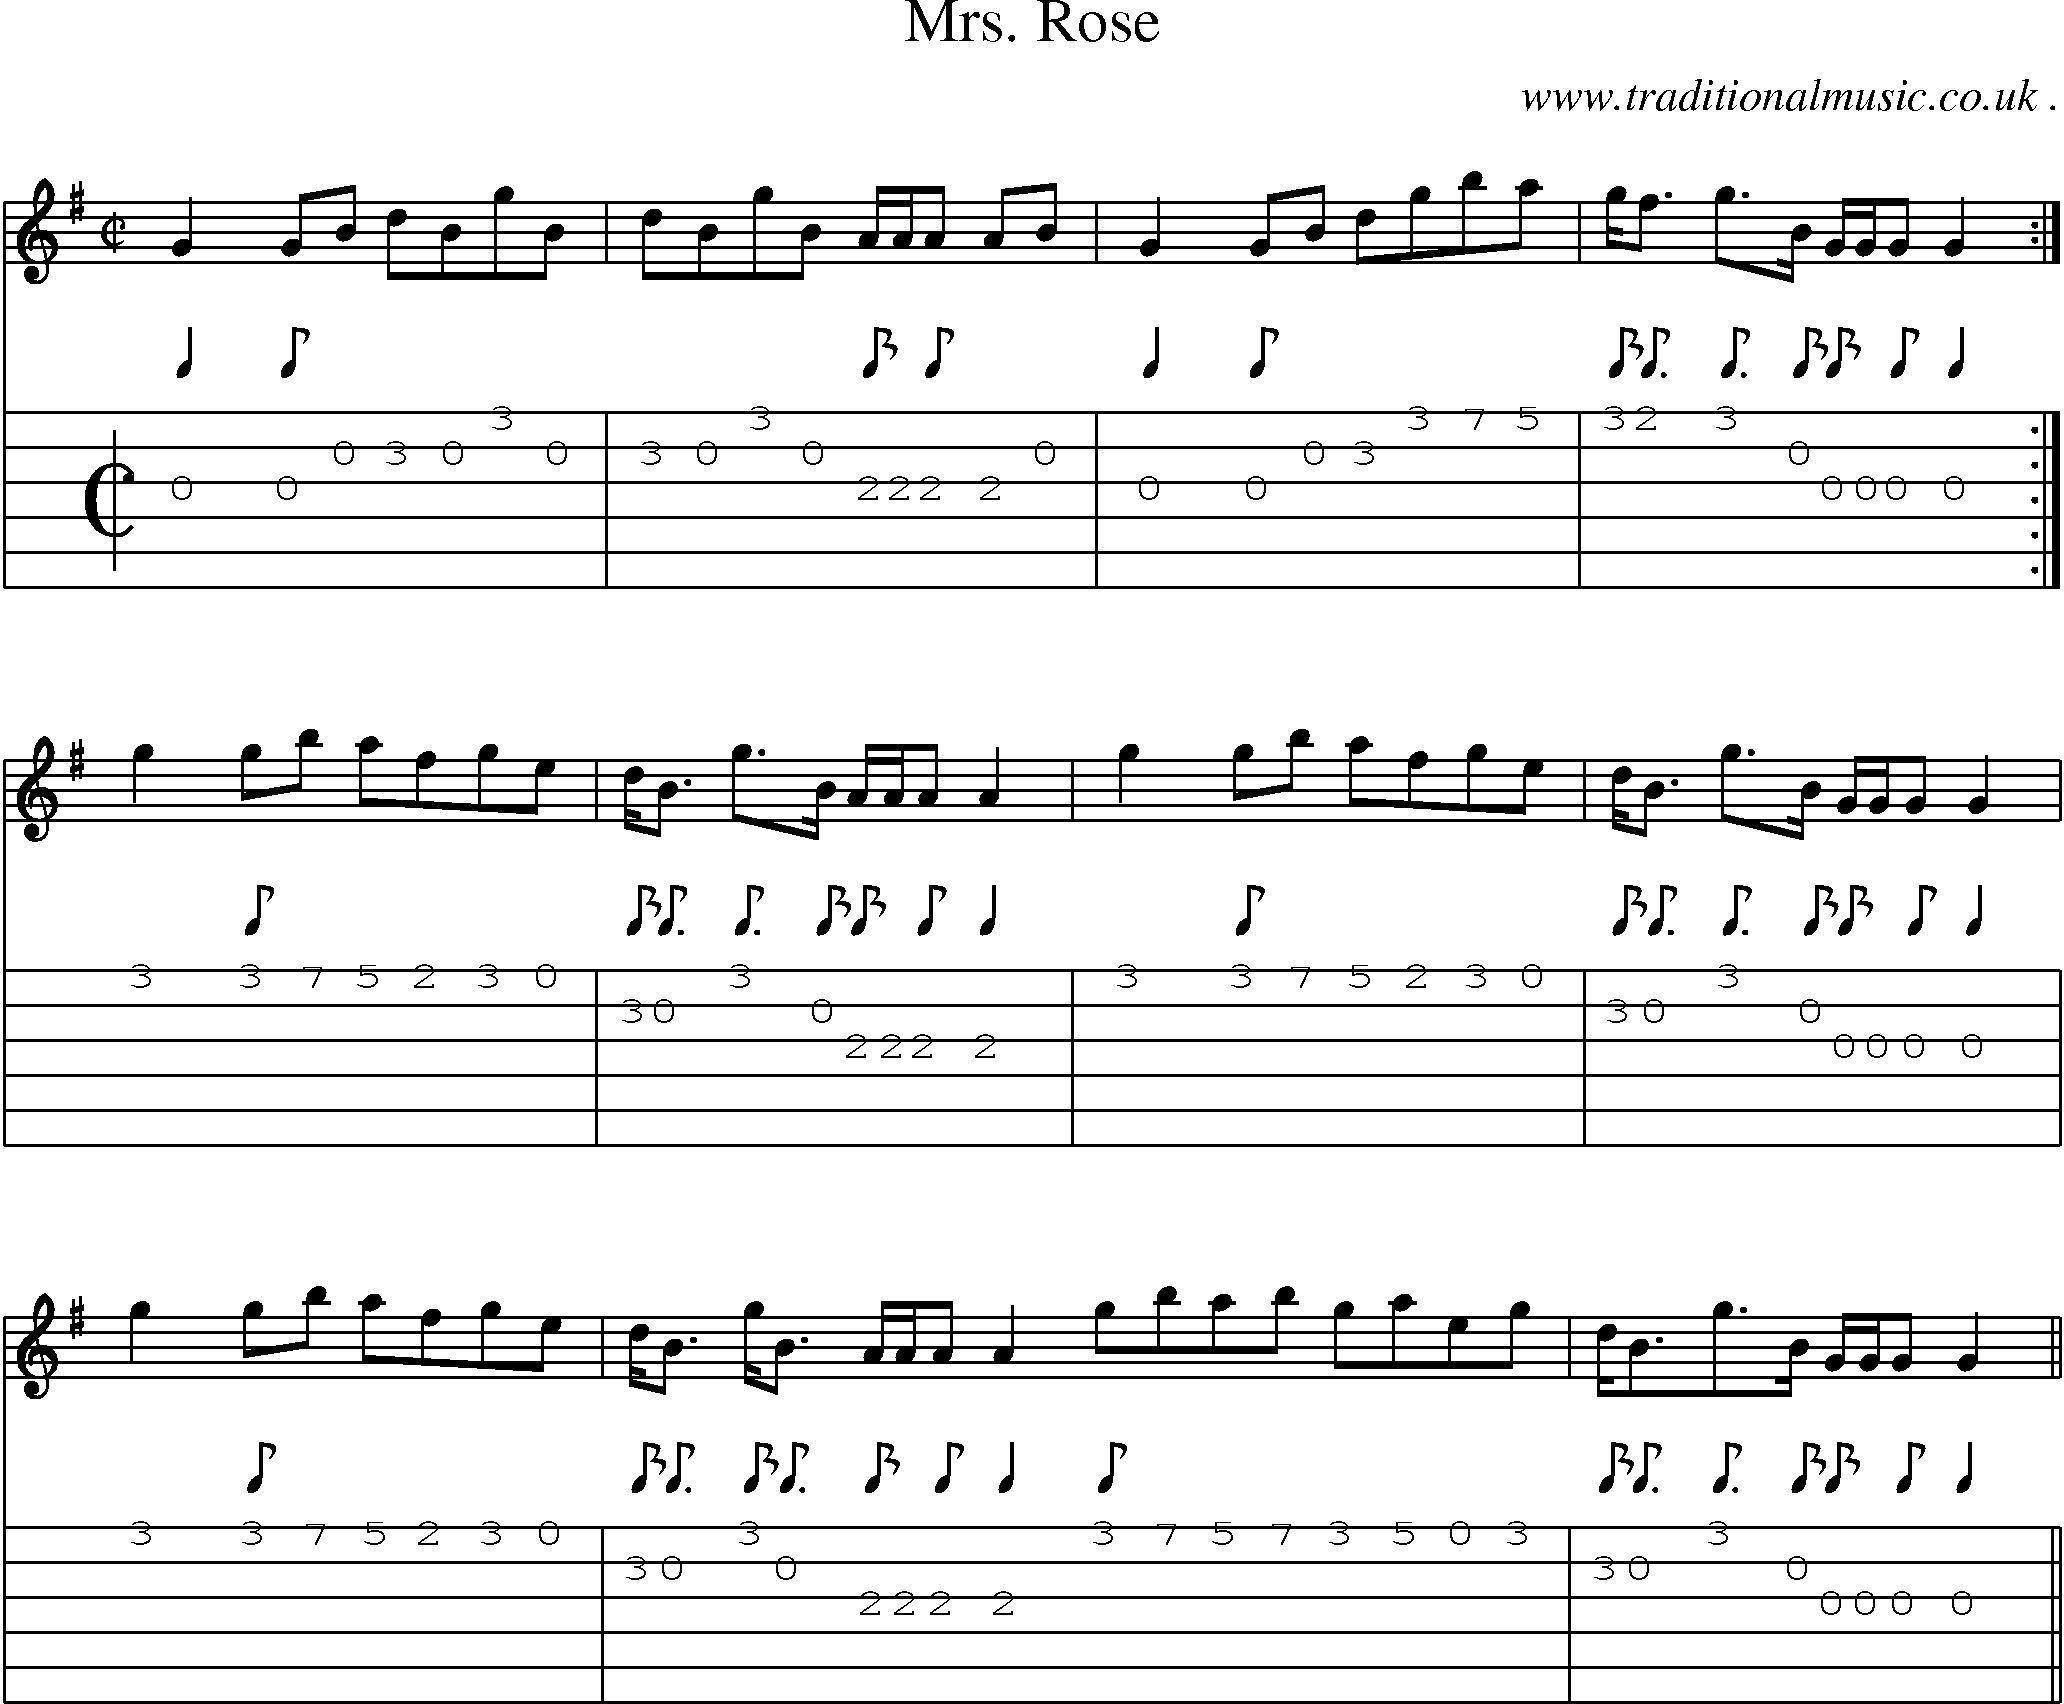 Sheet-music  score, Chords and Guitar Tabs for Mrs Rose